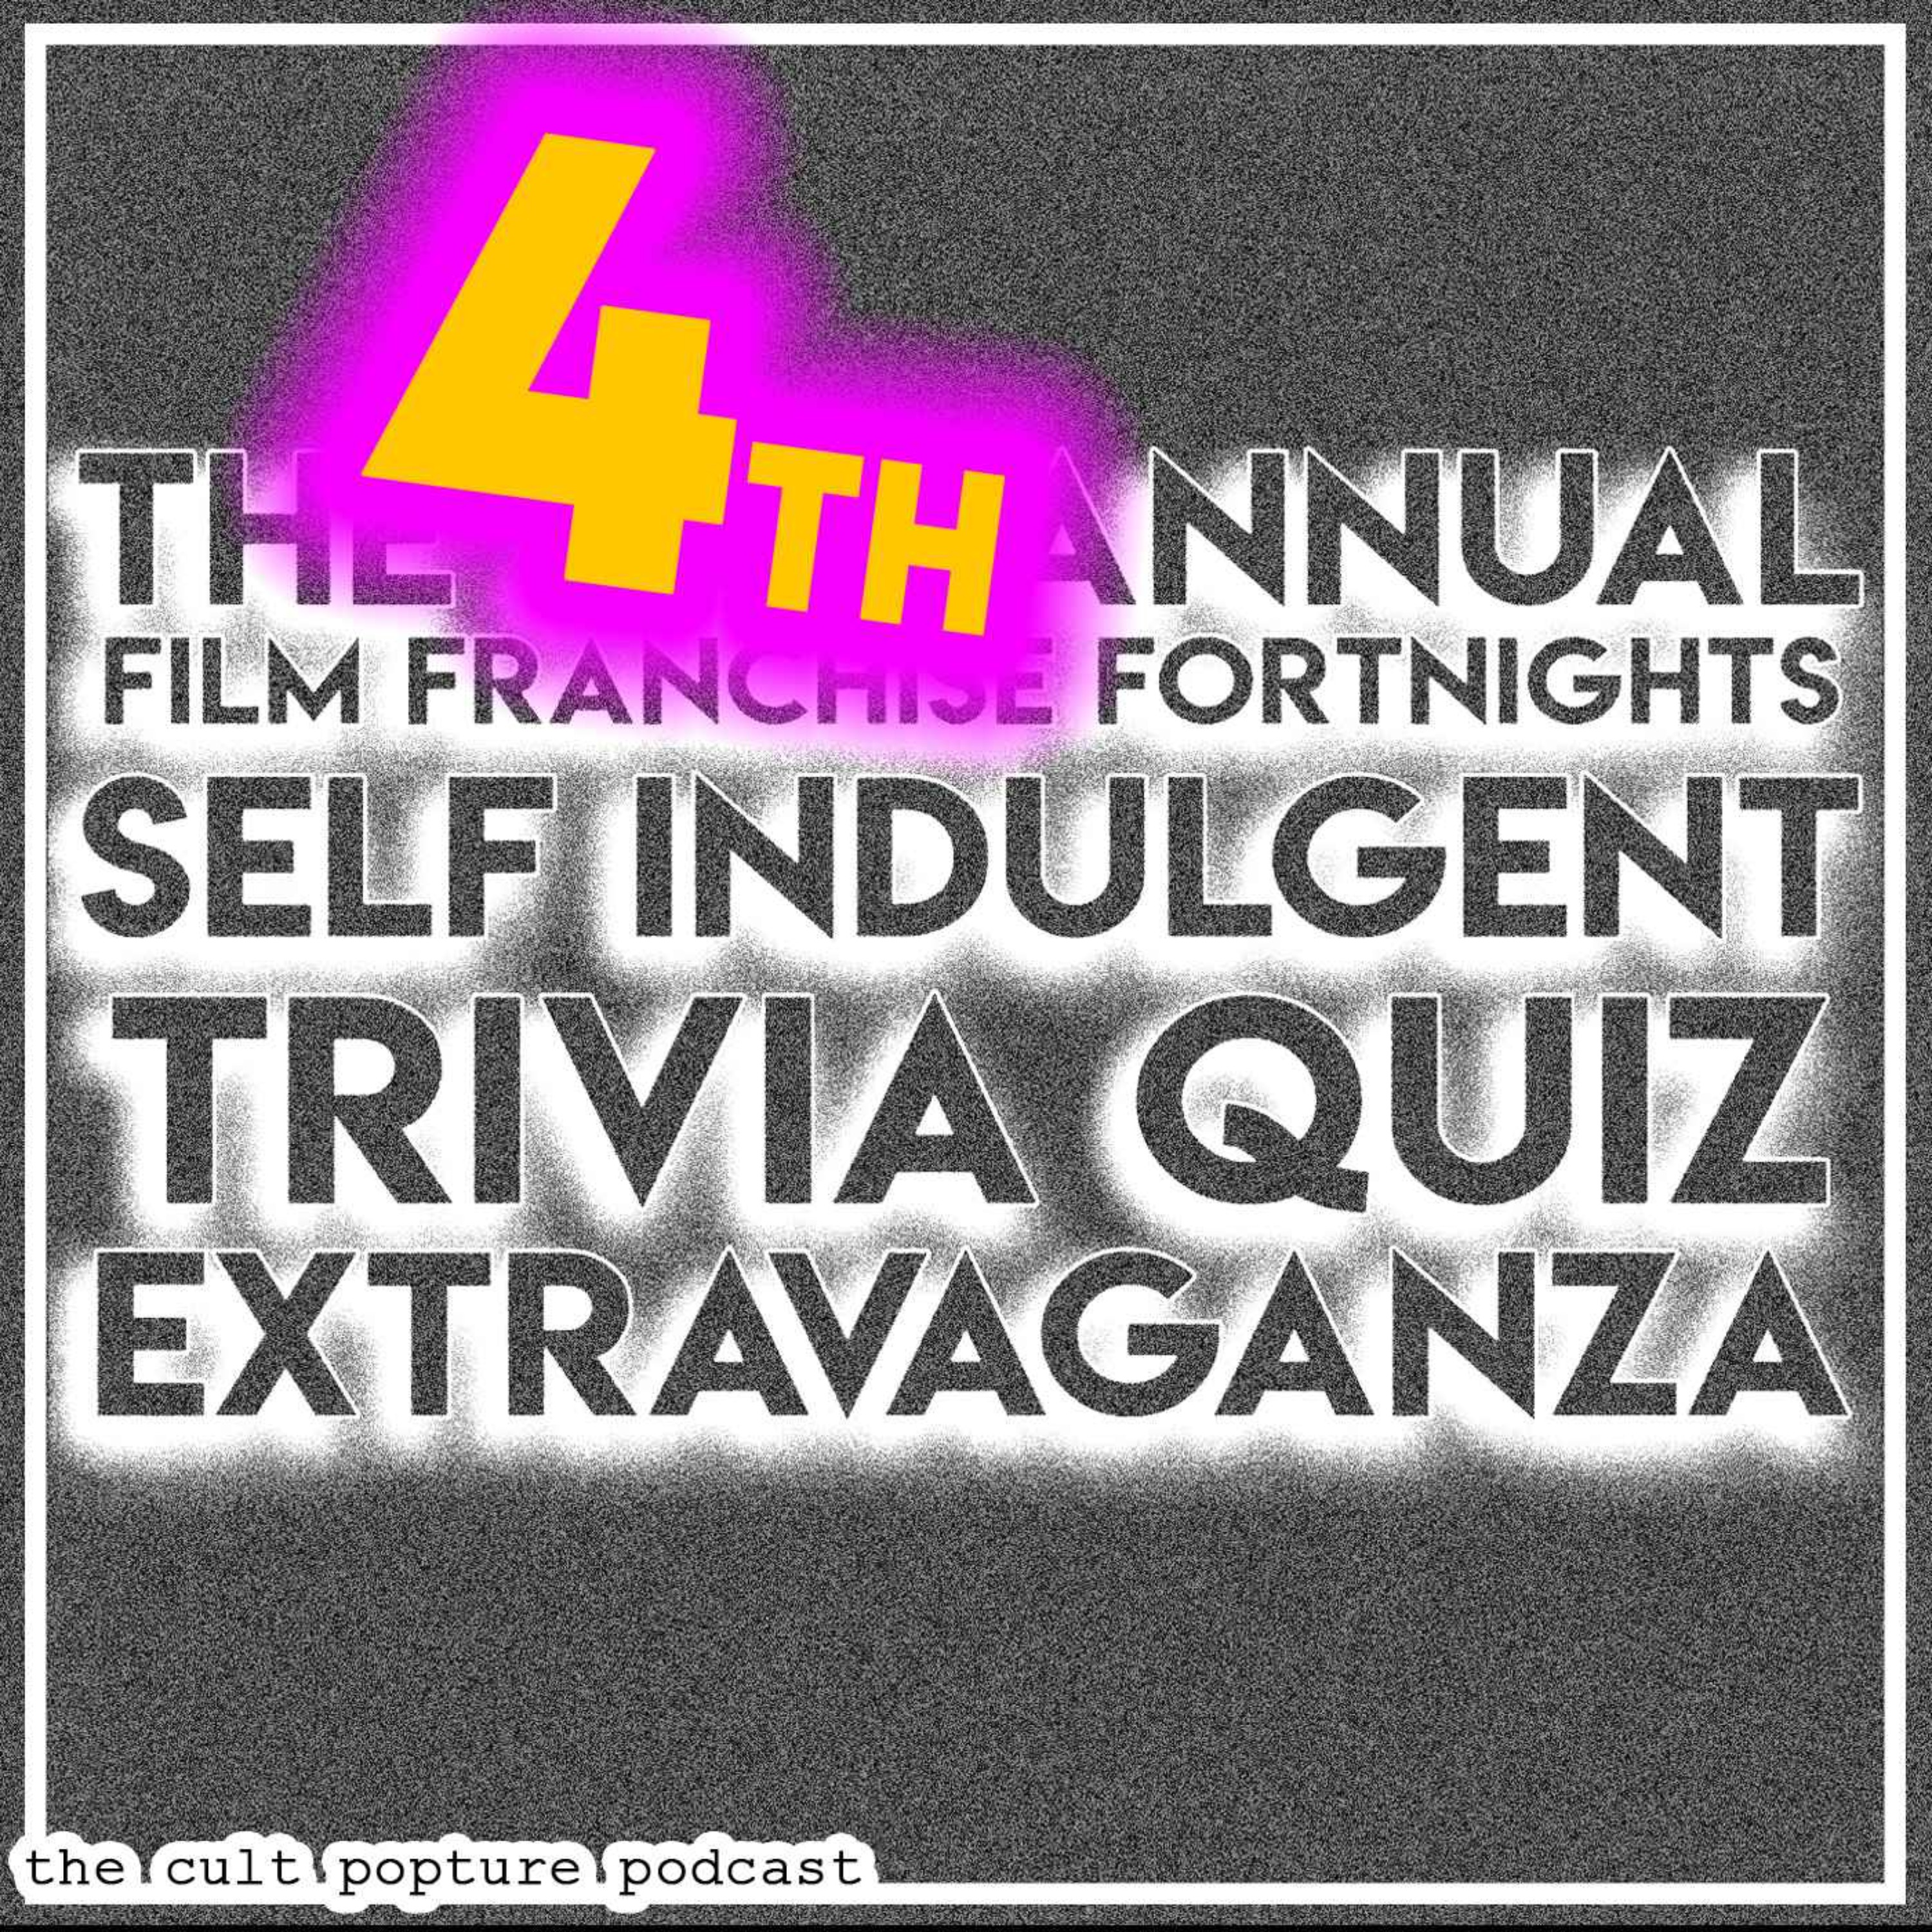 The 4th Annual Film Franchise Fortnights Self Indulgent Trivia Quiz Extravaganza | The Cult Popture Podcast